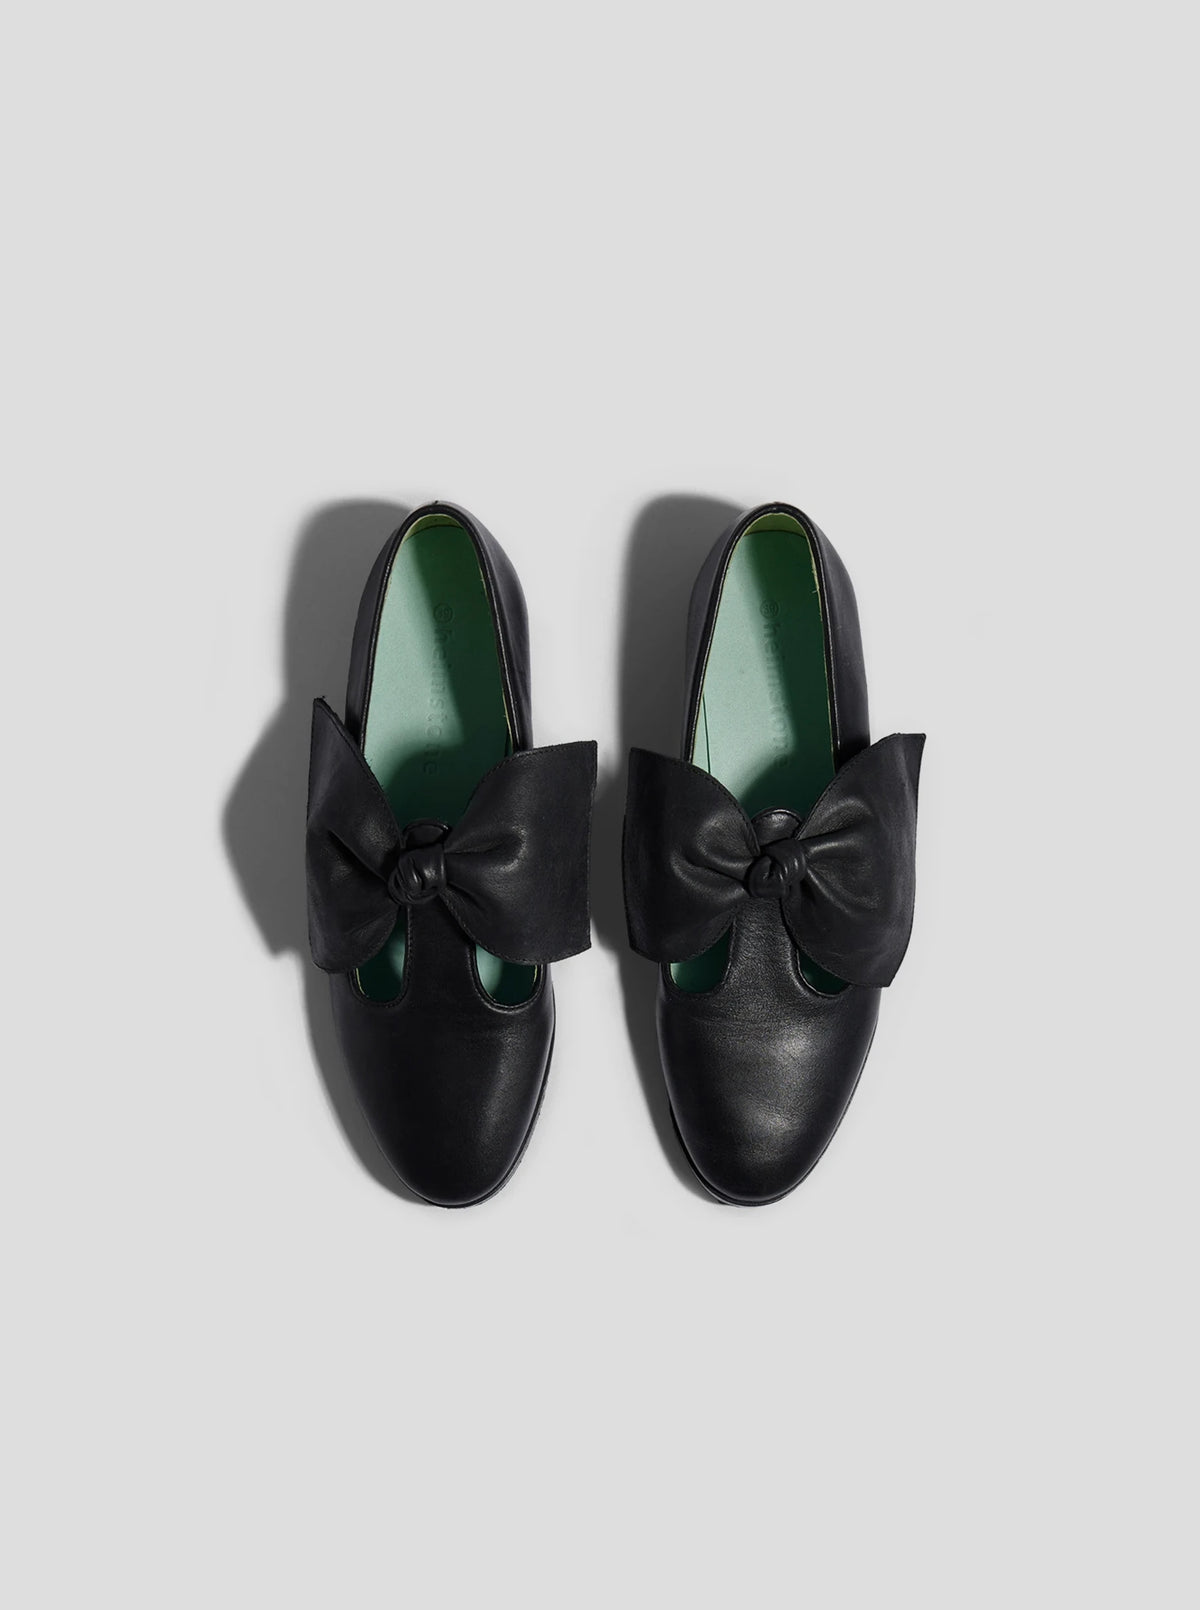 BB Ballerina Shoes in Black Leather